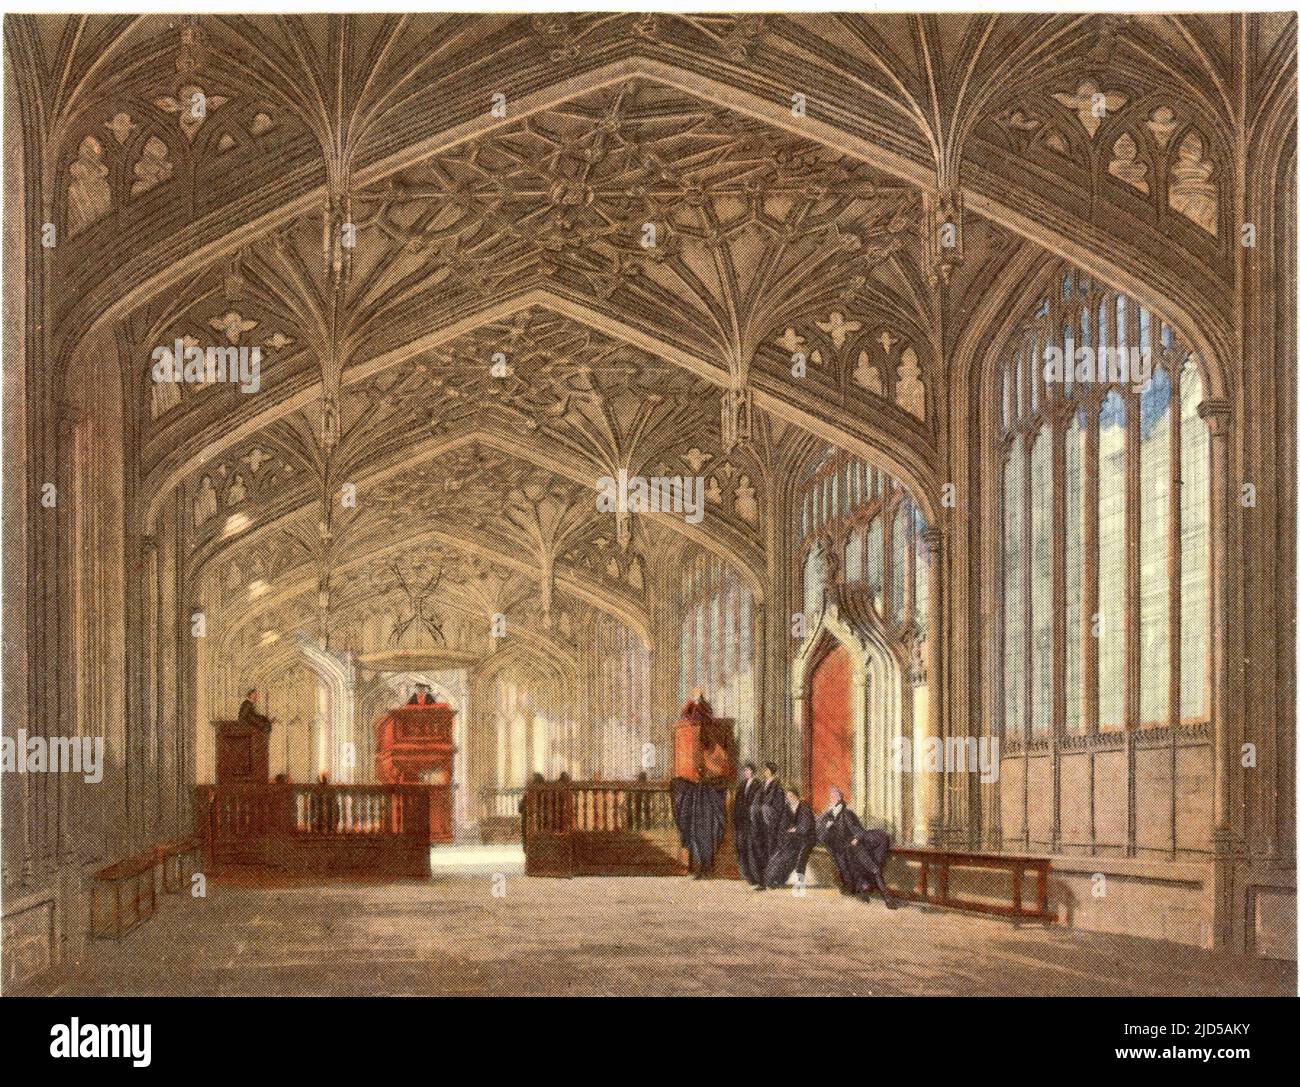 The Divine School, 1814. The Divinity School is a medieval building and room in the Perpendicular style in Oxford, England, part of the University of Oxford. Built between 1427 and 1483, the ceiling consists of elaborate lierne vaulting with bosses, designed by William Orchard (fl1468-d1504) in the 1480s. A print from 'A History of the University of Oxford, its Colleges, Halls, and Public Buildings', published by Rudolph Ackermann, 1814. Ilustrated by Augustus Pugin, F. Mackenzie and others. Stock Photo